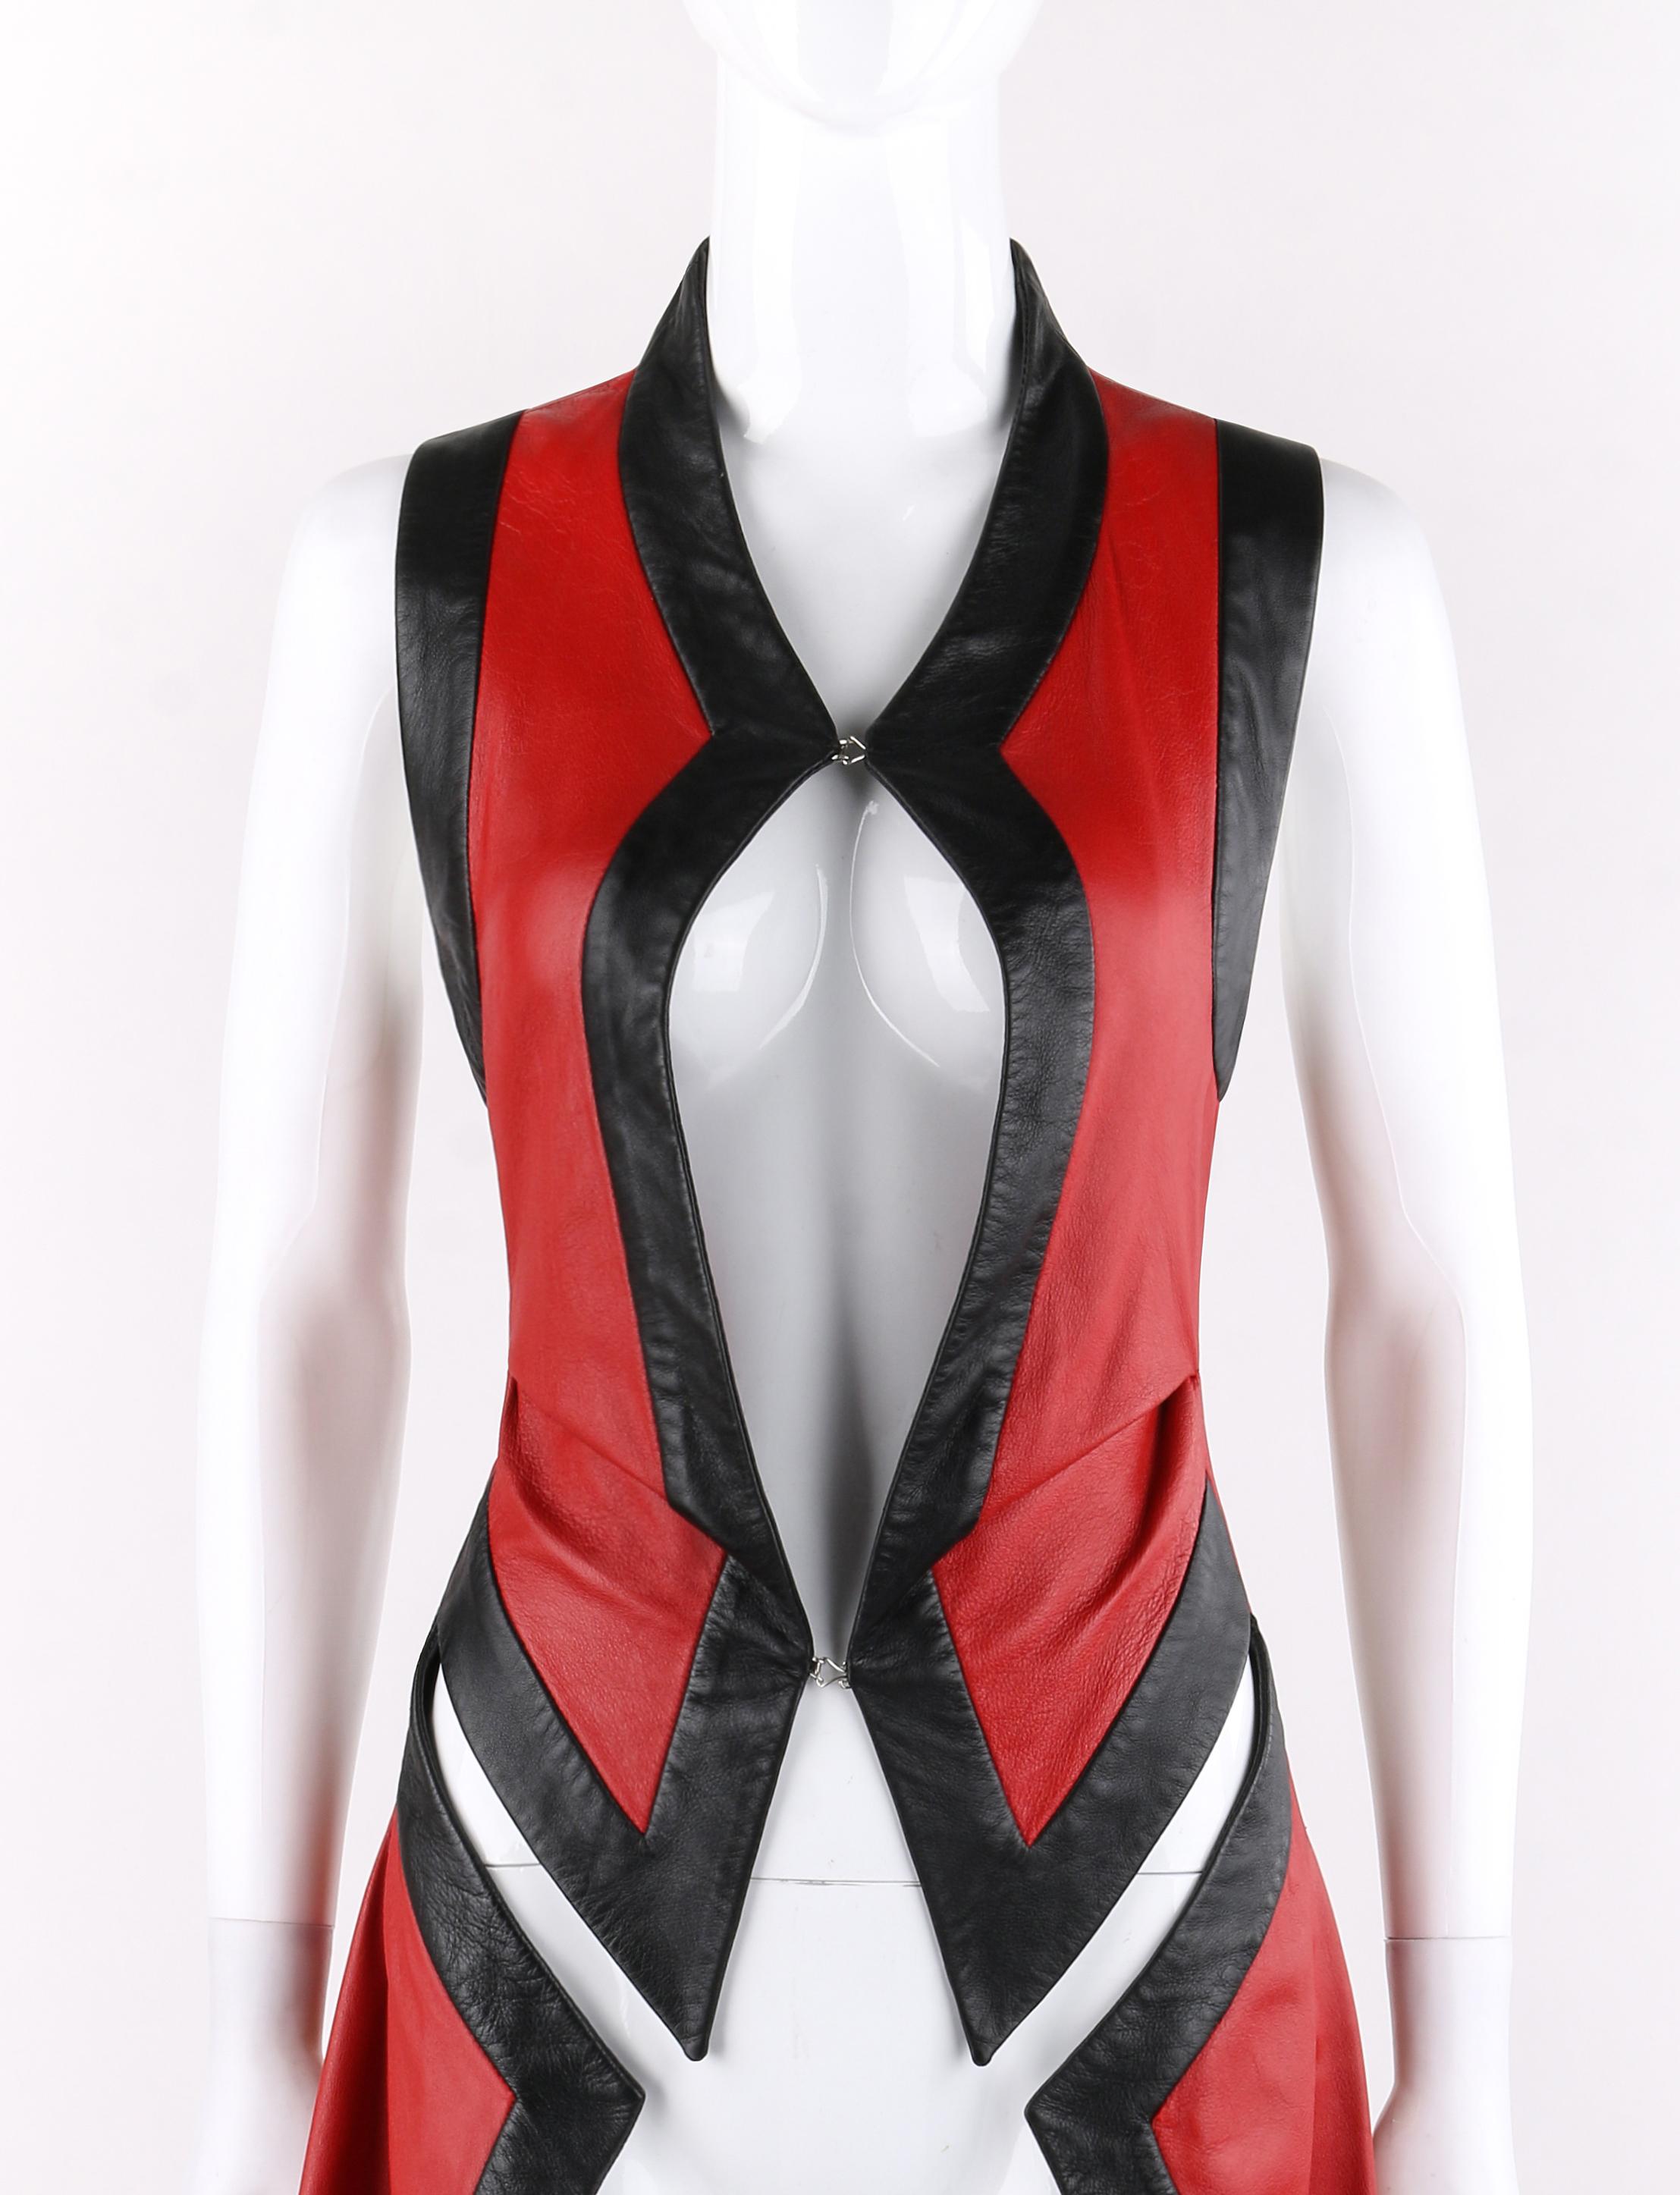 ALEXANDER McQUEEN S/S 2000 “Eye” Runway Red Black Leather Cut Out Vest Jacket 
 
Brand / Manufacturer: Alexander McQueen 
Collection: Spring / Summer 2000 “Eye” Runway look #50
Style: Vest, jacket
Color(s): Shades of red and black. 
Lined: Yes     